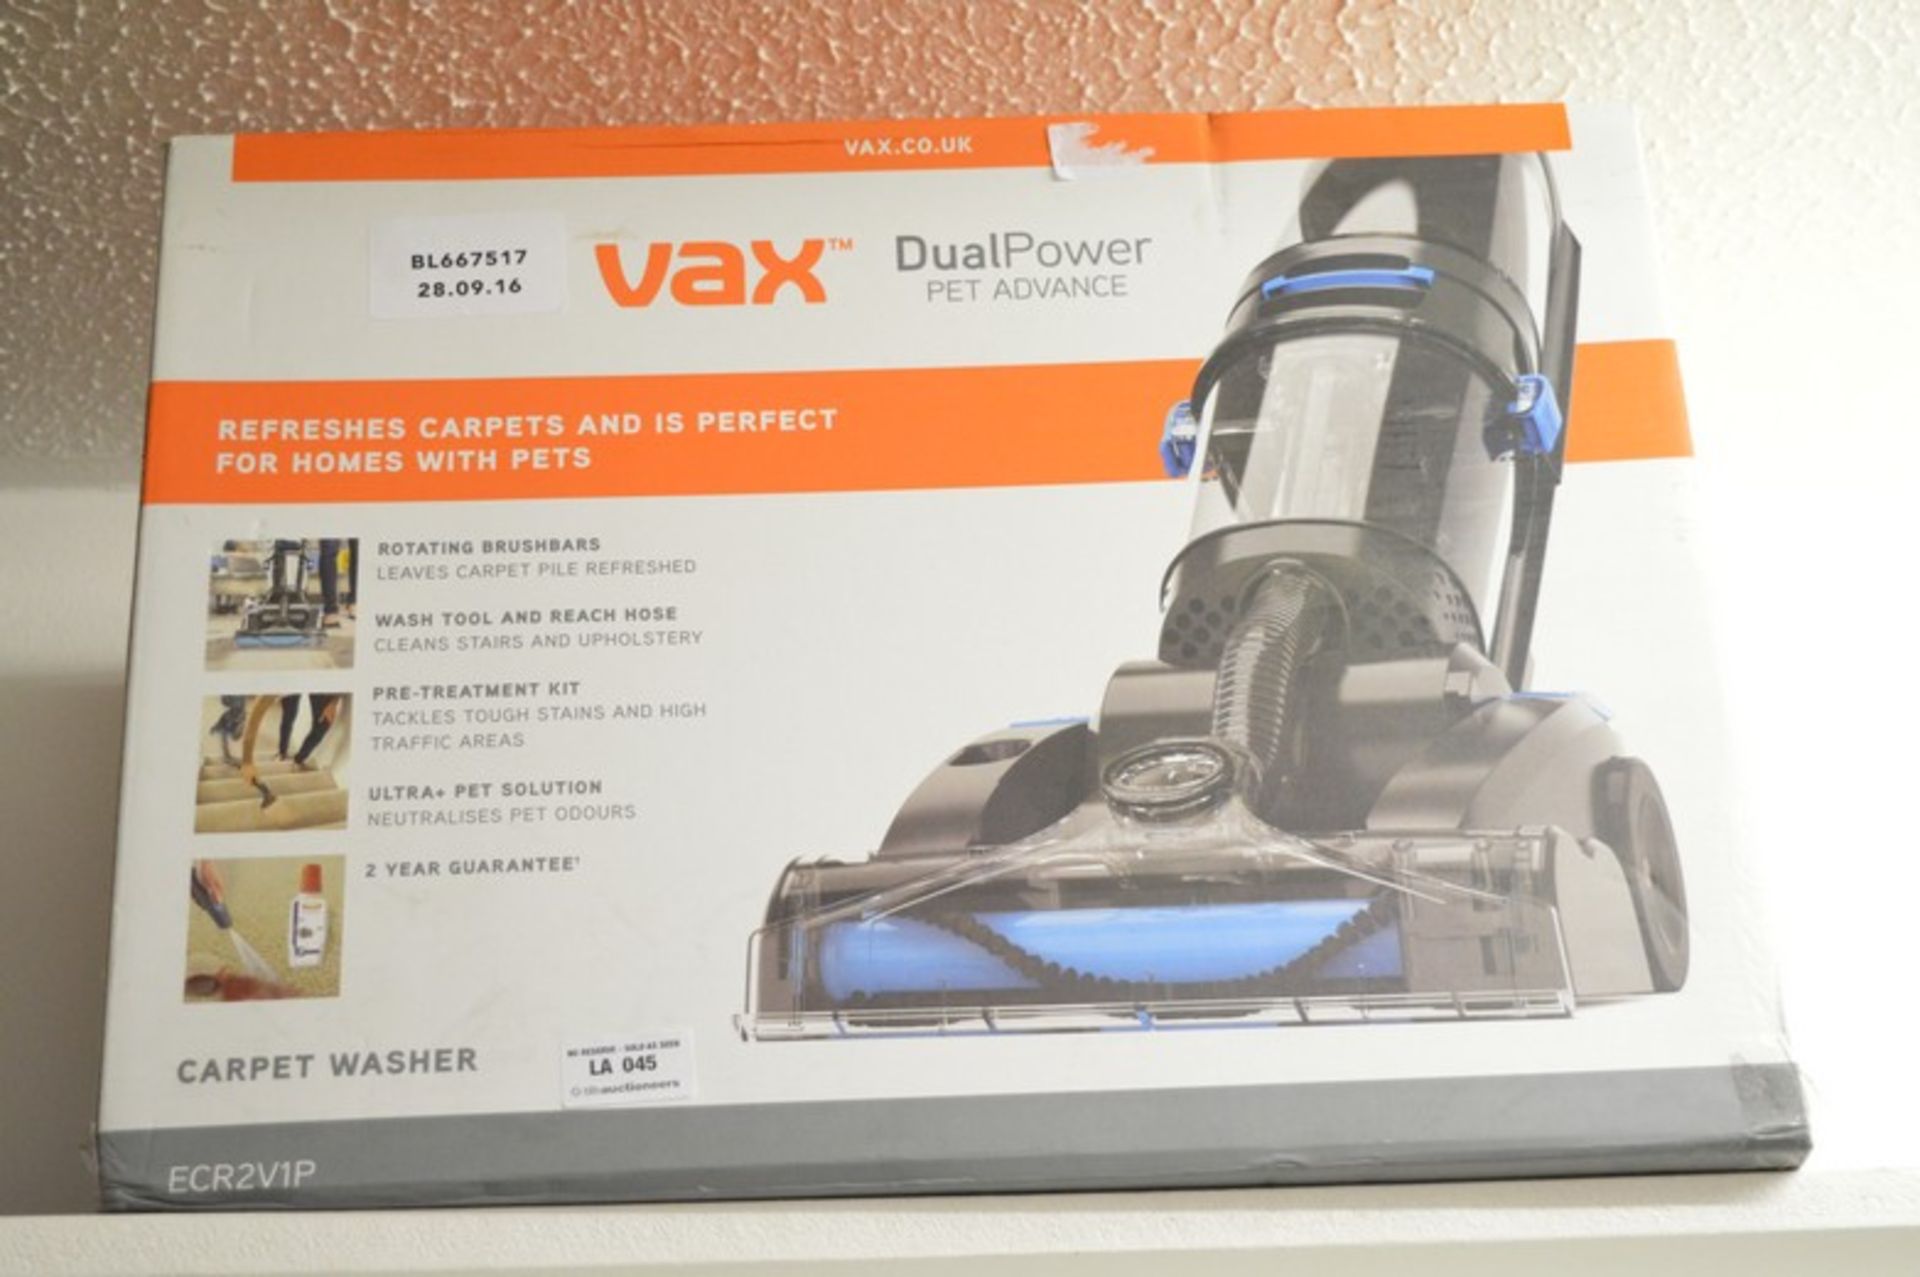 1 x BOXED VAX DUAL POWER PET ADVANCE CARPET WASHER RRP £150 28.09.16 *PLEASE NOTE THAT THE BID PRICE